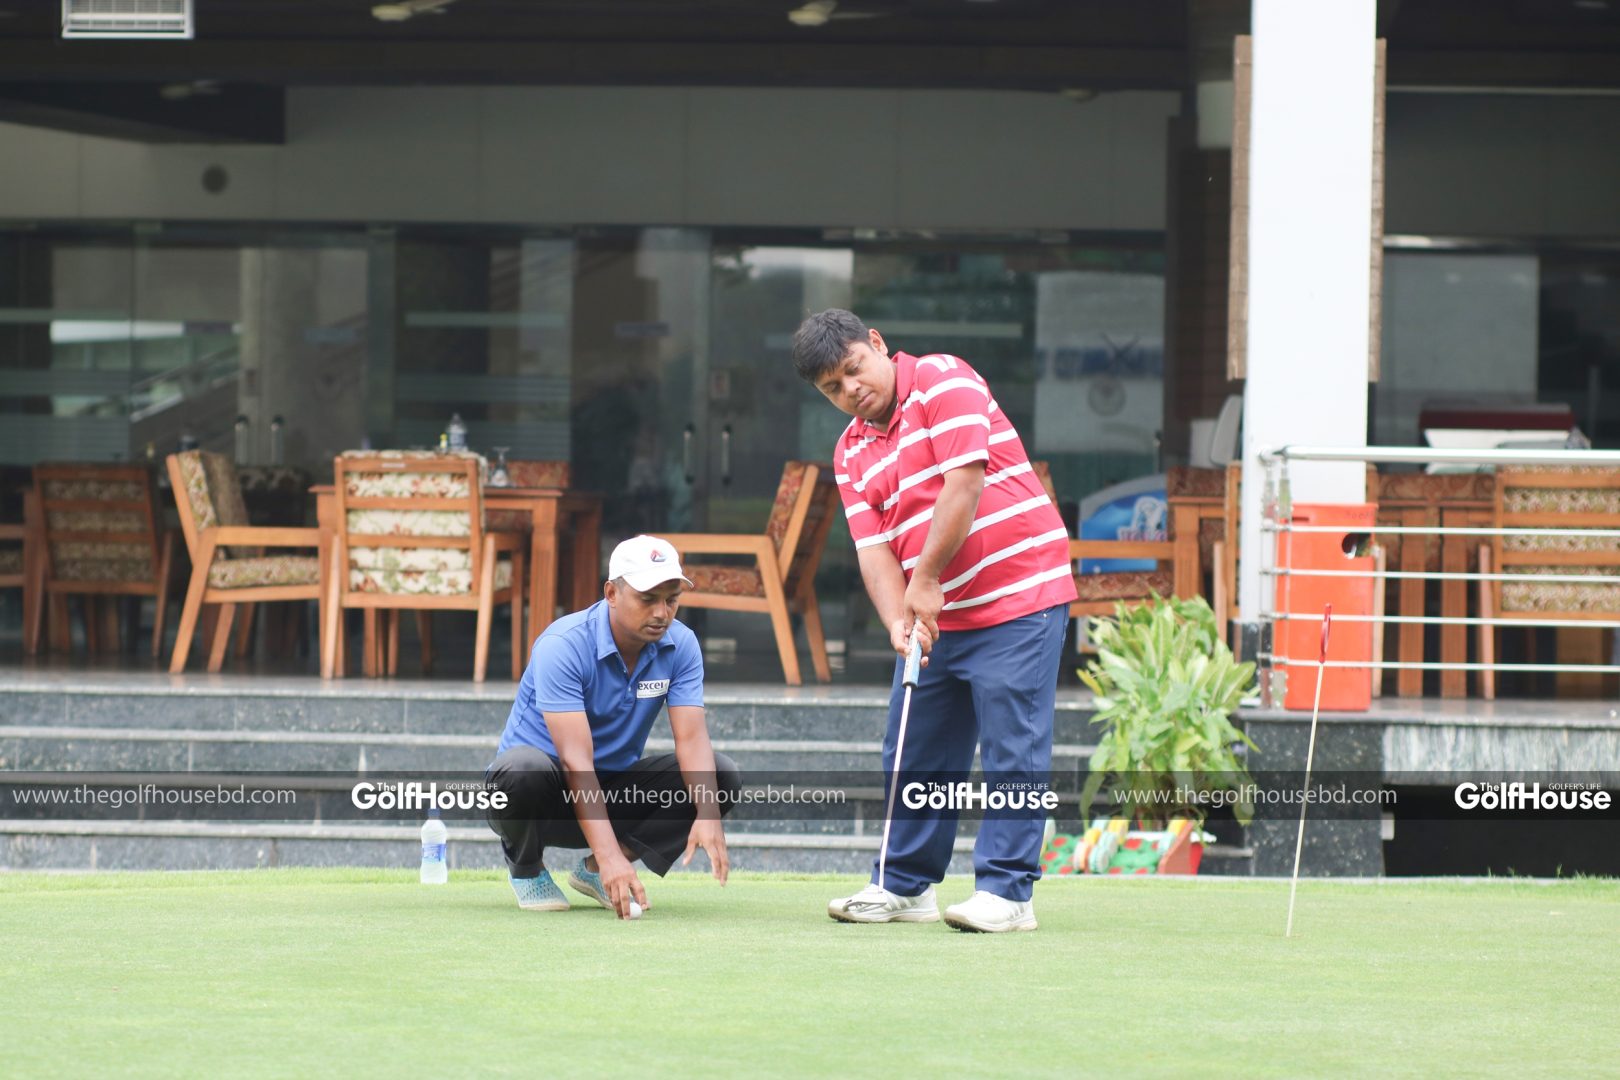 Nazmul_Hasan_is_an_amateur_golfer_of_the_country_who_started_playing_the_game_while_trying_to_make_use_of_his_ample_leisure_time.